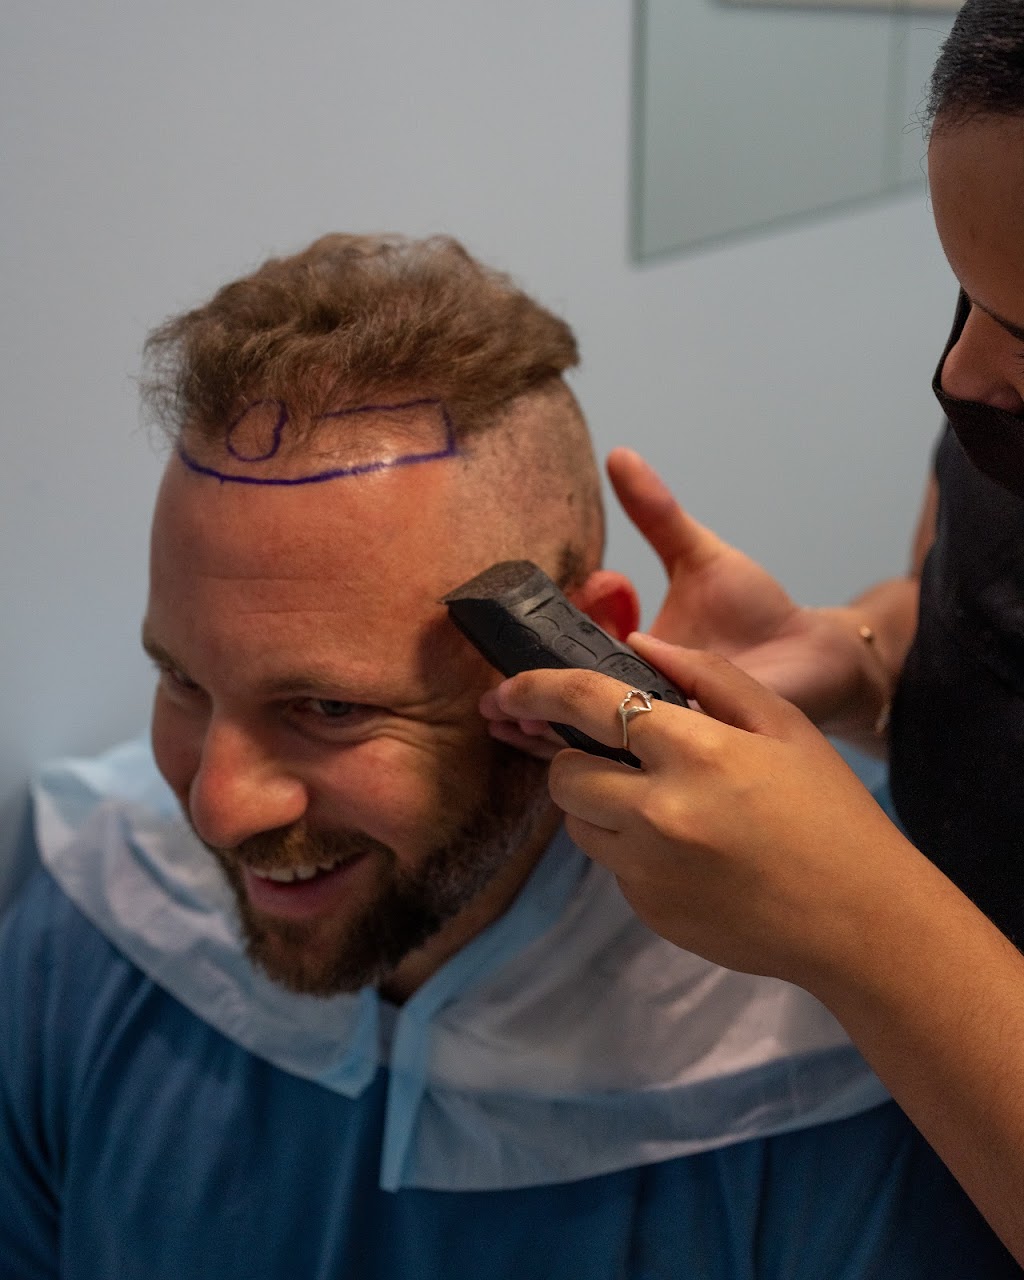 FUE Hair Transplant Solution New Jersey | 4057 Asbury Ave Suite 021, Tinton Falls, NJ 07753 | Phone: (848) 420-9970